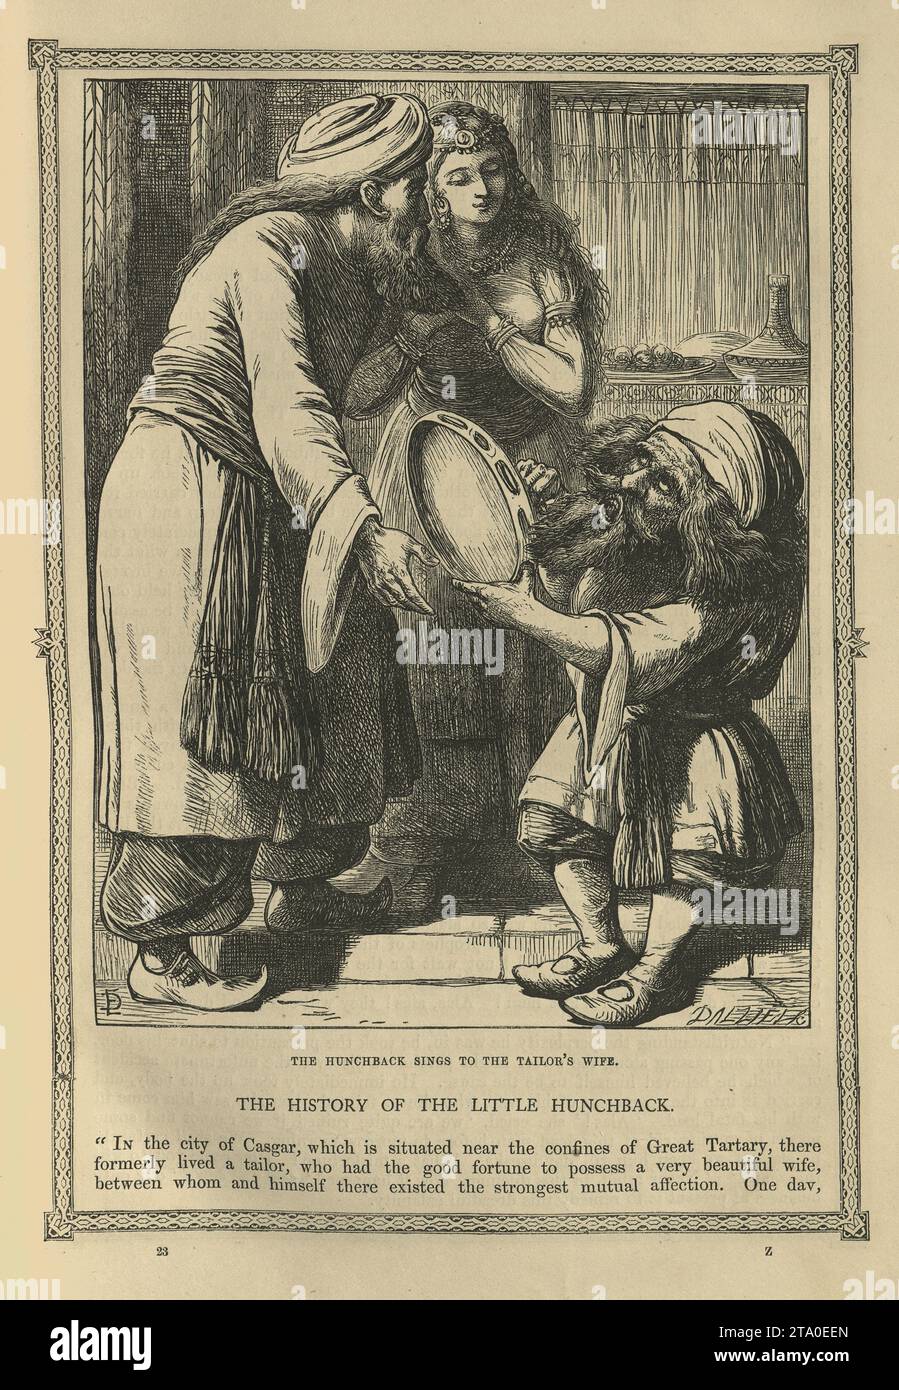 Vintage illustration One Thousand and One Nights, the hunchback sings to the tailor's wife, Arabian, Middle Eastern folktales, by The Brothers Dalziel. History of the little hunchback Stock Photo